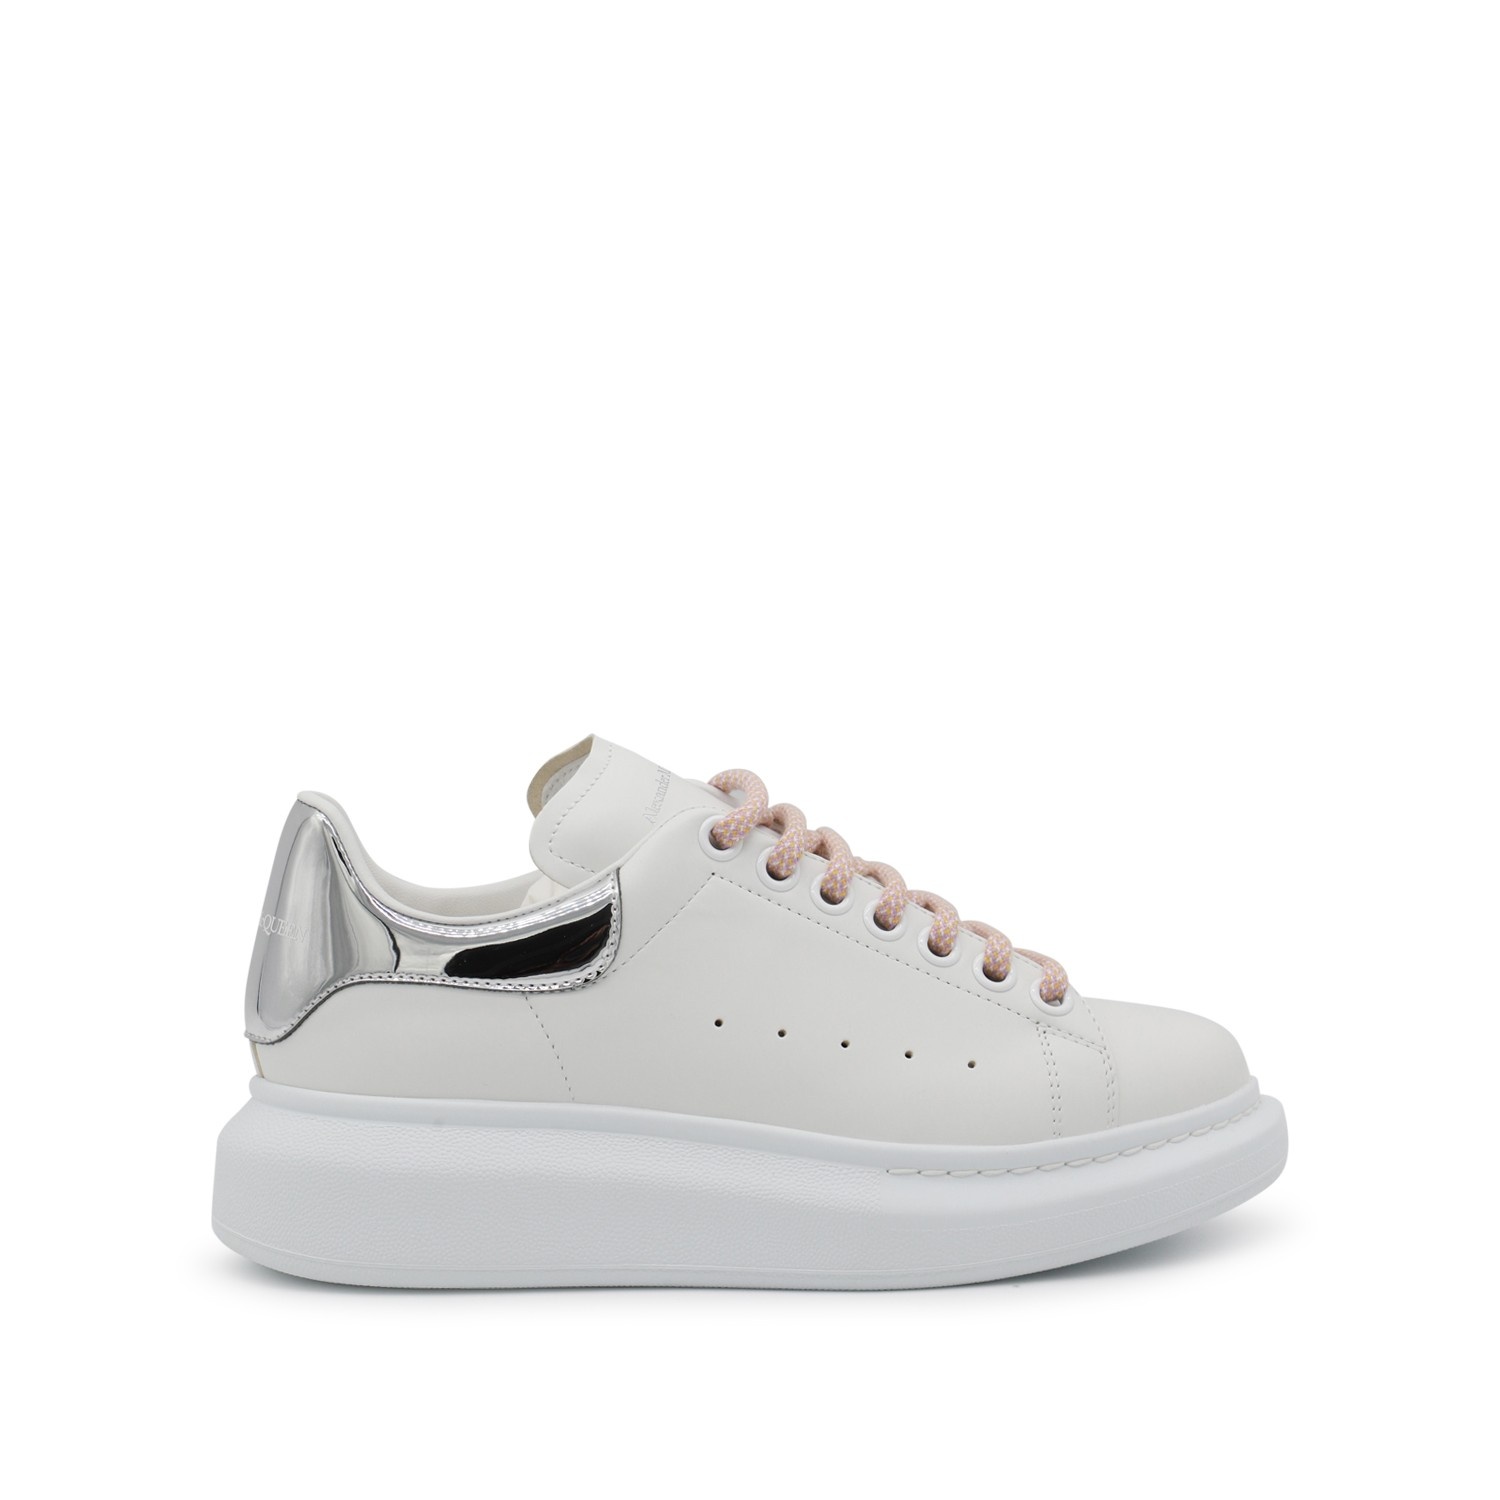 WHITE, PINK AND SILVER-TONE LEATHER OVERSIZED SNEAKERS - 1